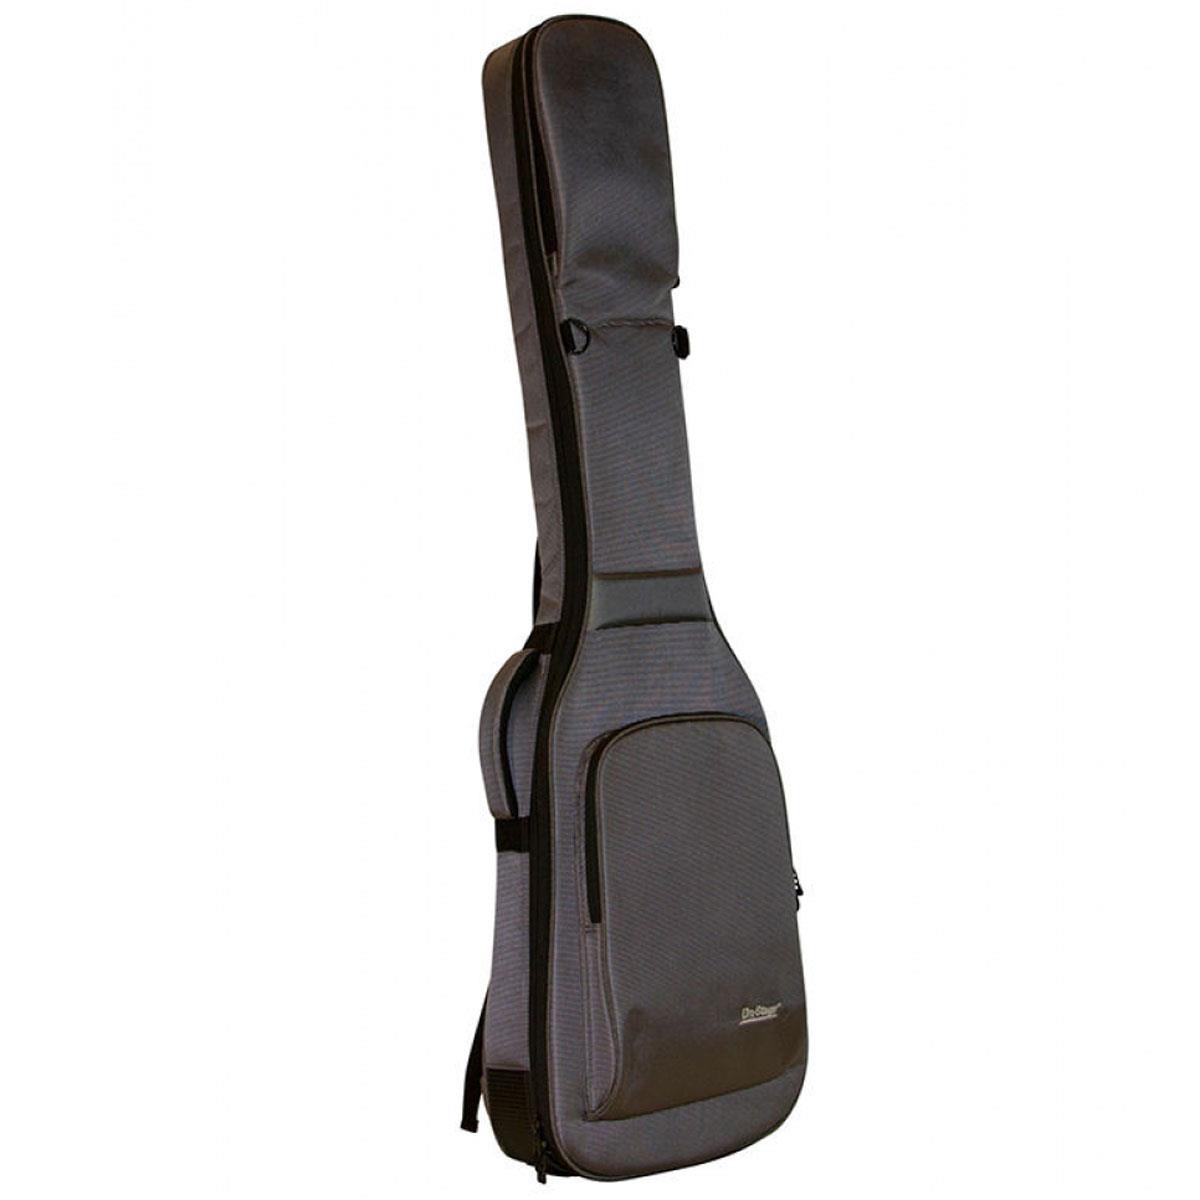 

On-Stage GBB4990 Deluxe Bass Guitar Gig Bag, Charcoal Gray